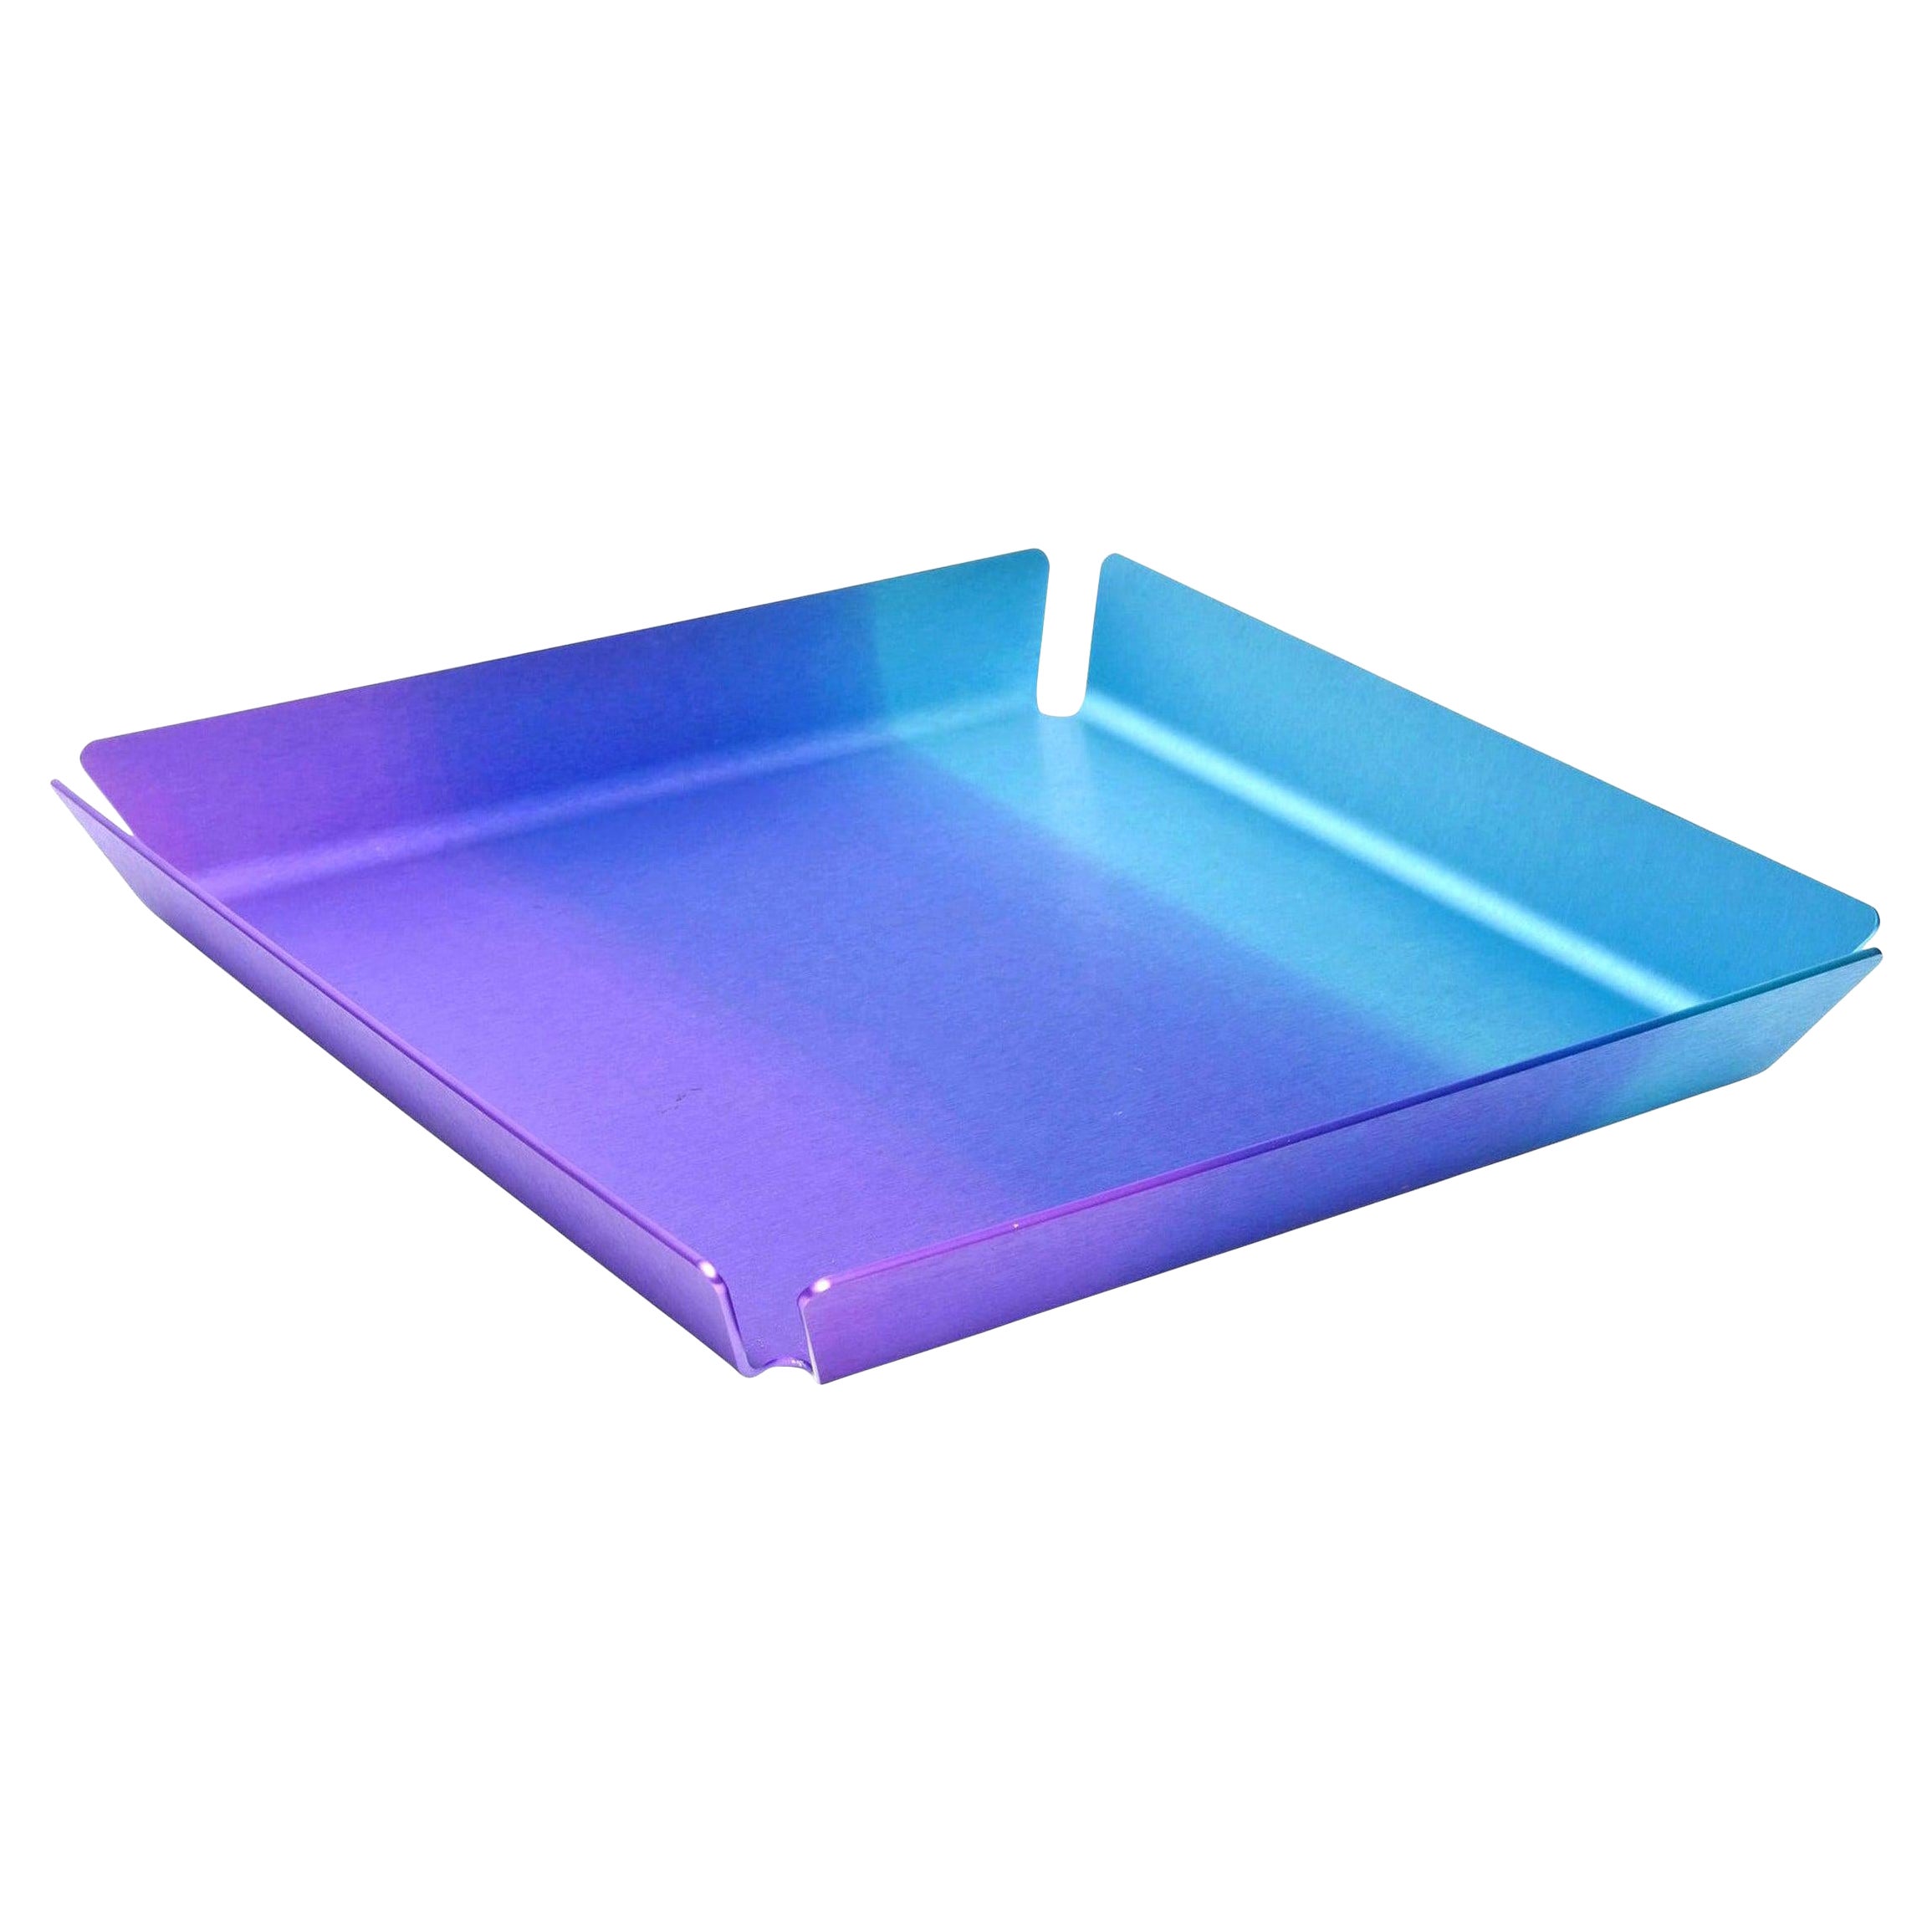 Neal Fray for Opening Ceremony Anodized Purple Turquoise Aluminum Tray Barware For Sale